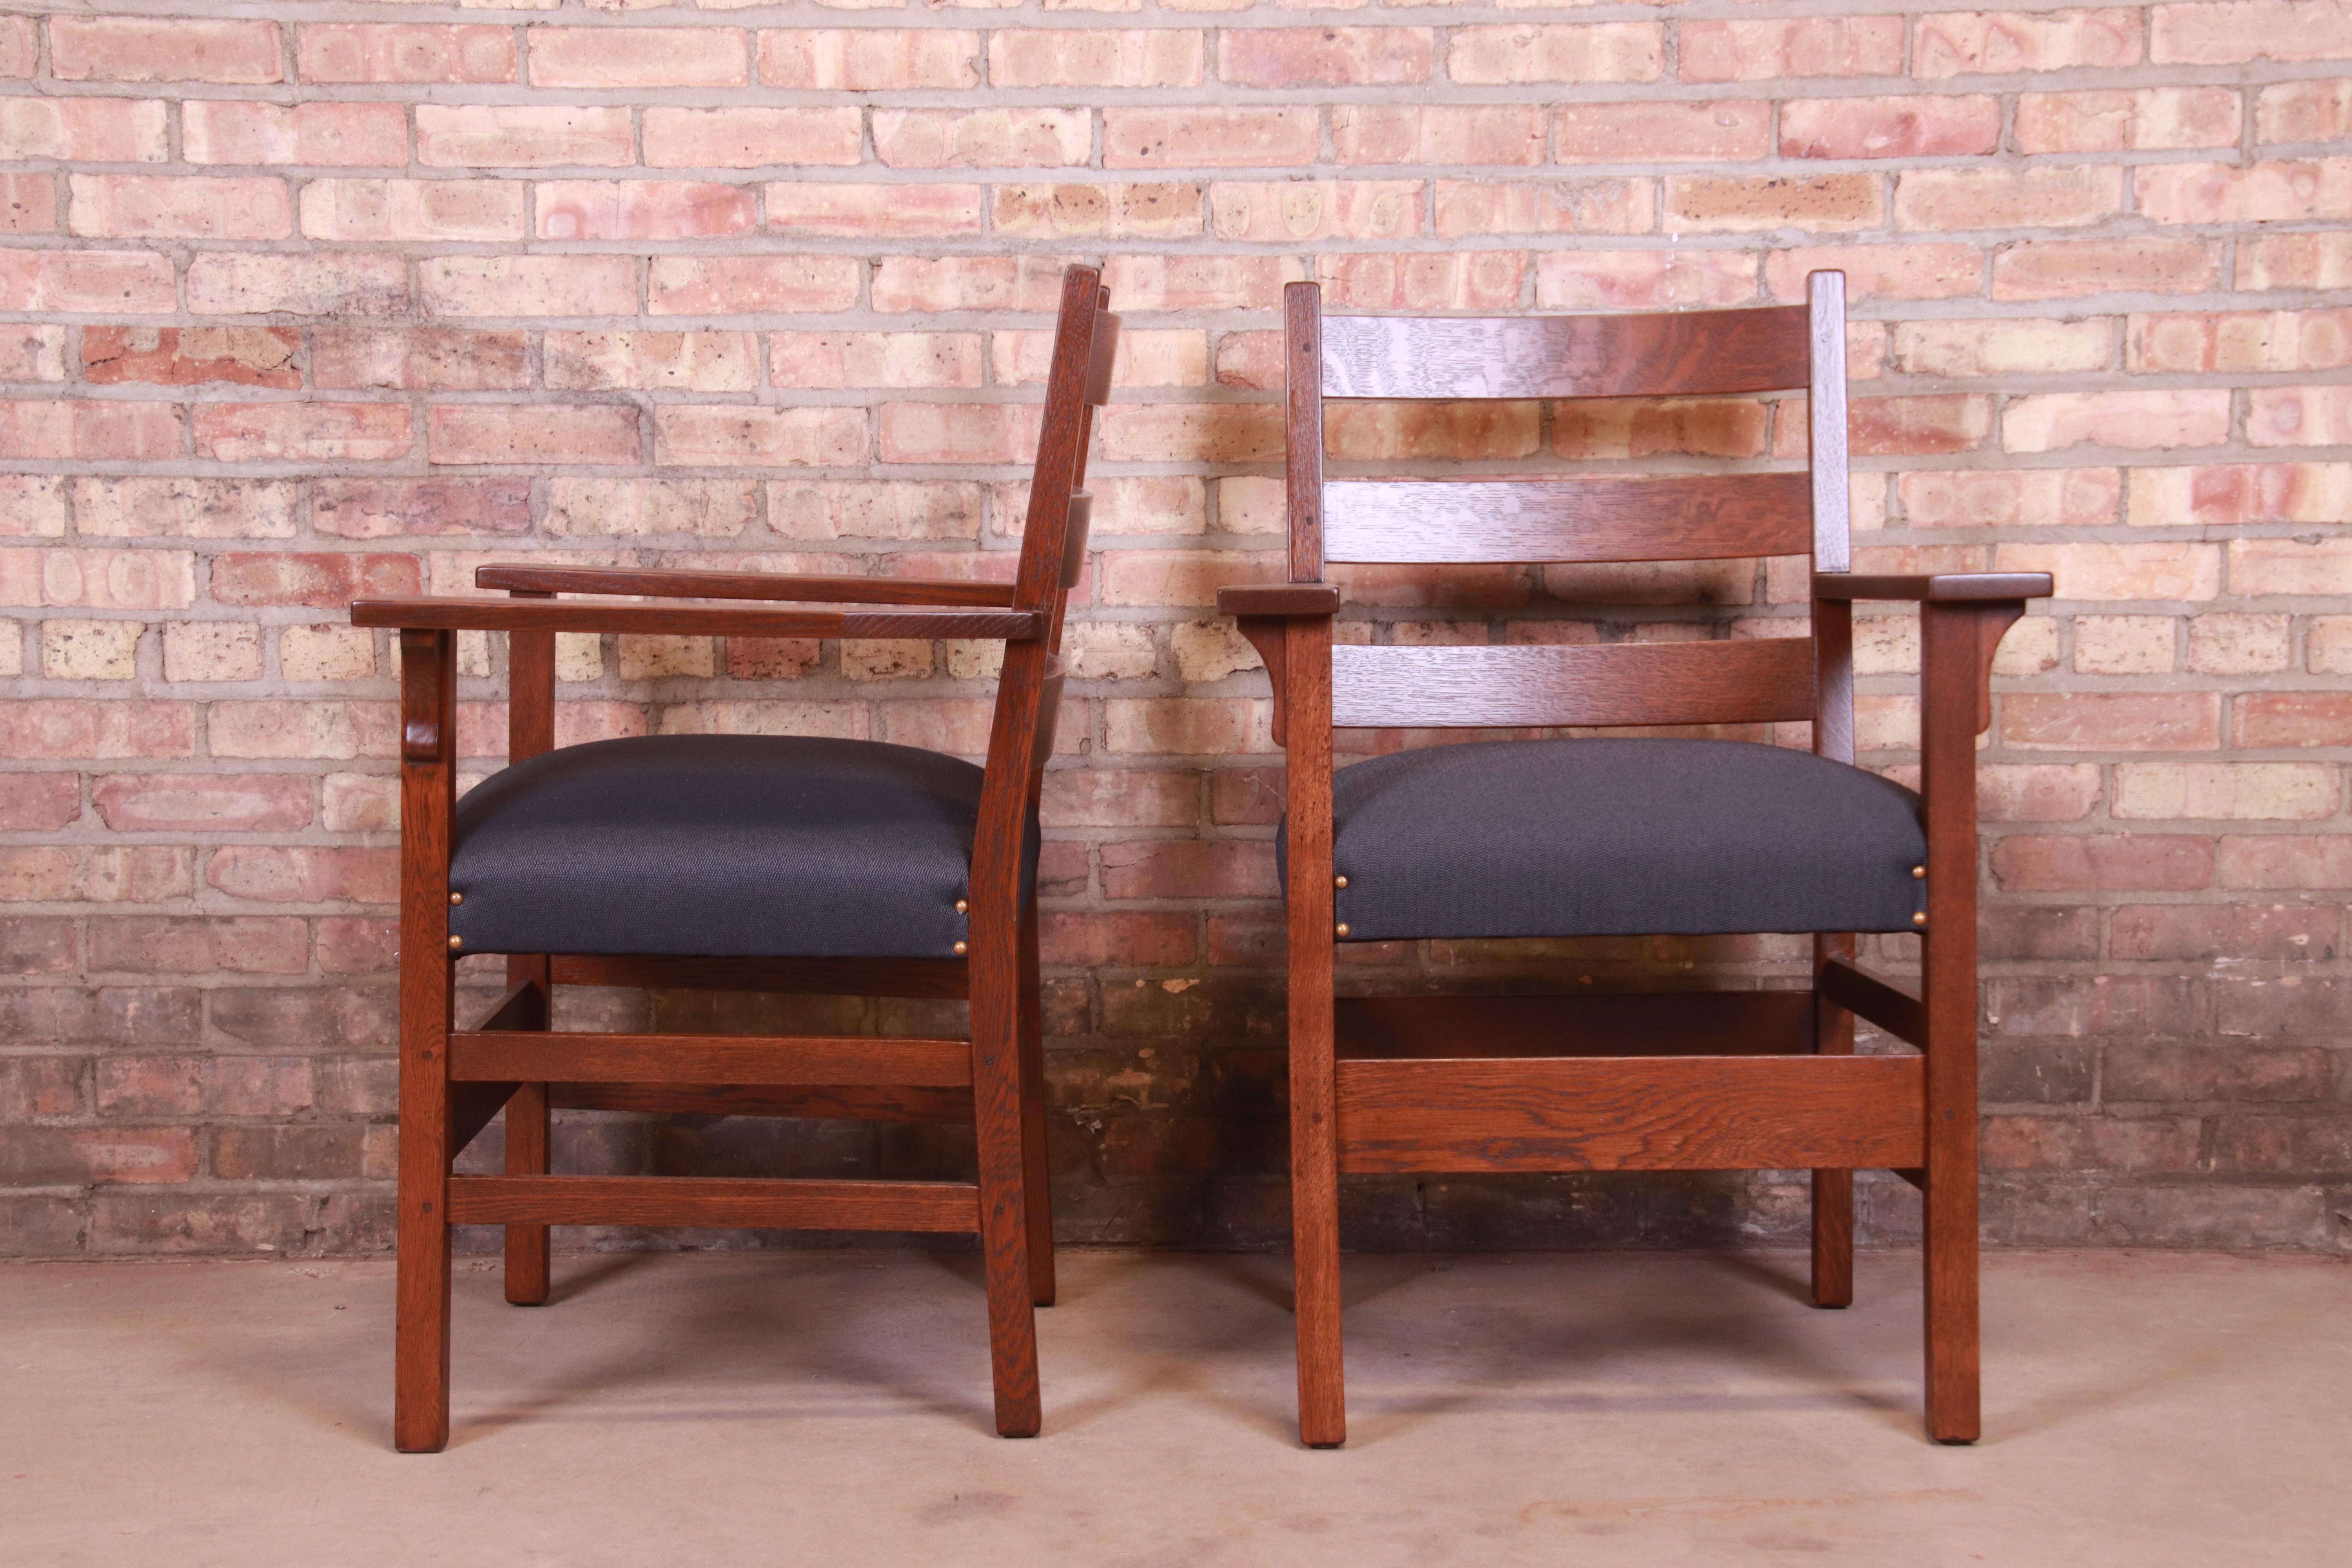 Rare Signed Gustav Stickley Mission Oak Arts & Crafts Dining Chairs, Restored 1